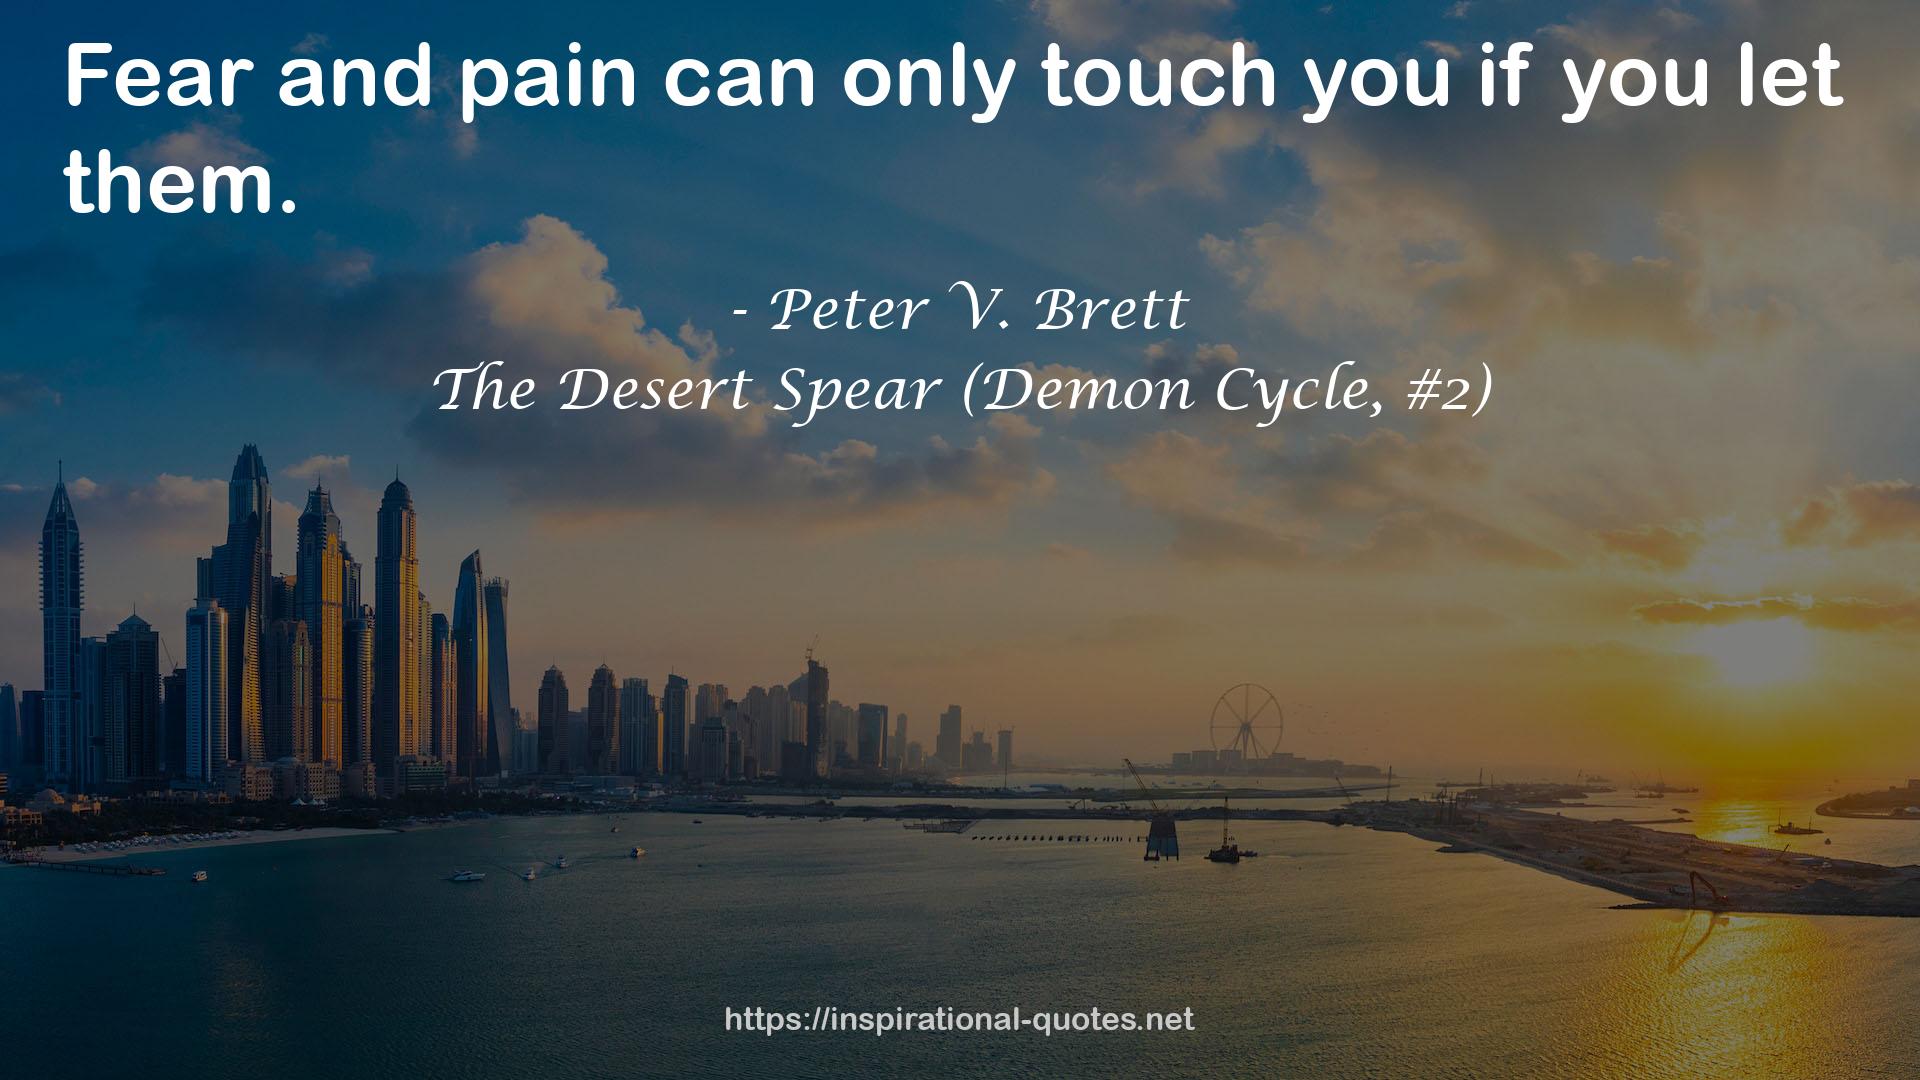 The Desert Spear (Demon Cycle, #2) QUOTES